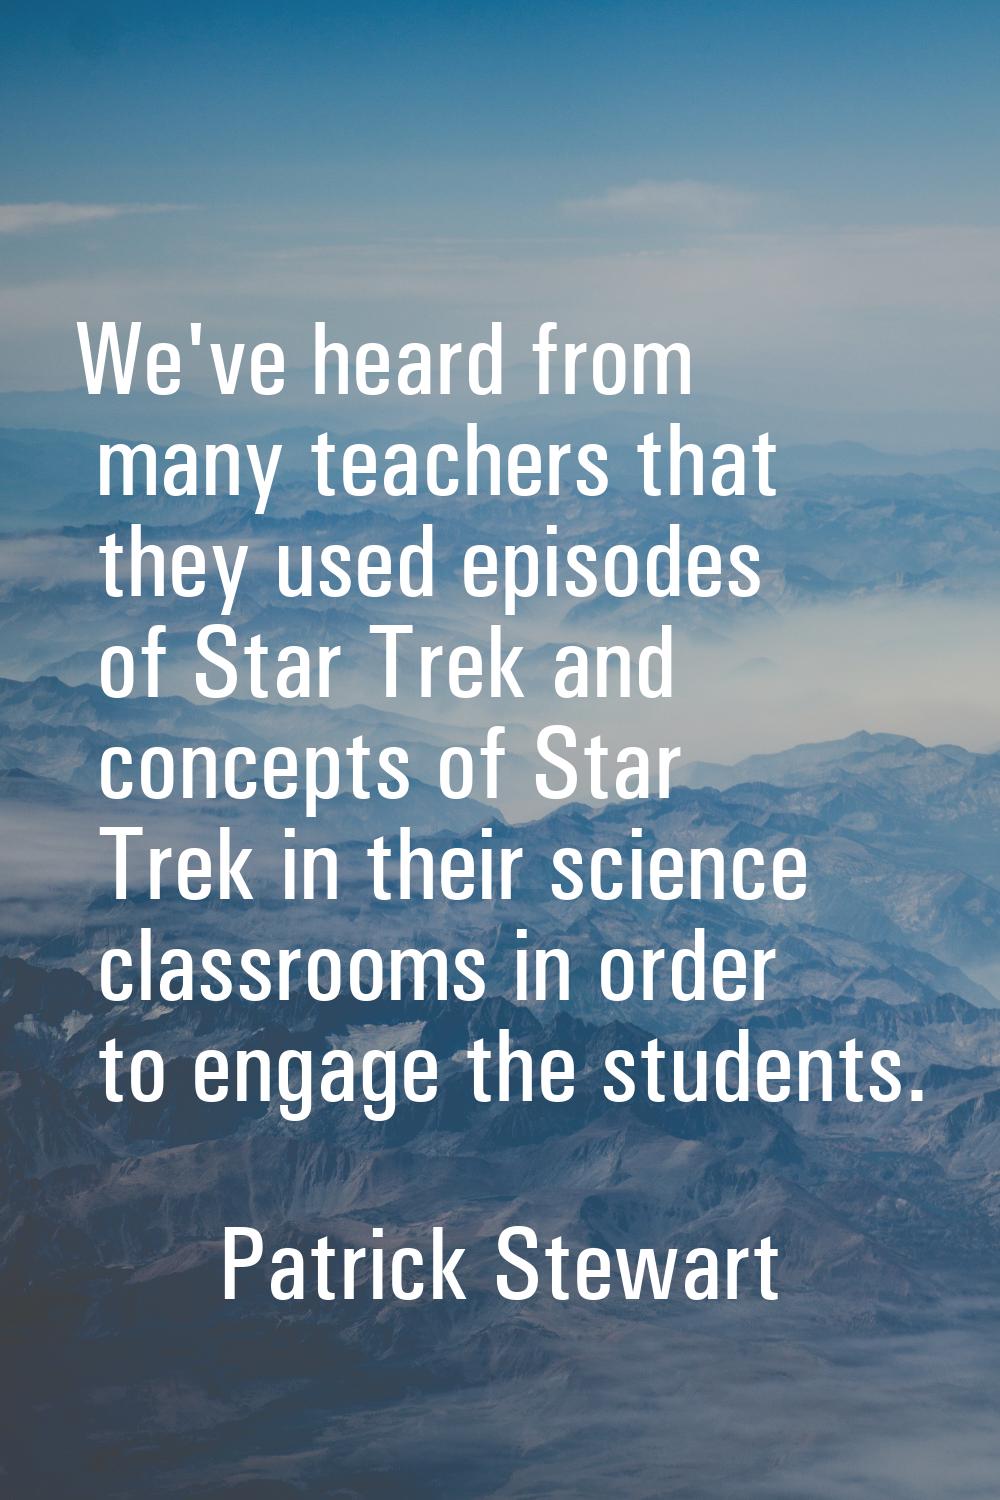 We've heard from many teachers that they used episodes of Star Trek and concepts of Star Trek in th